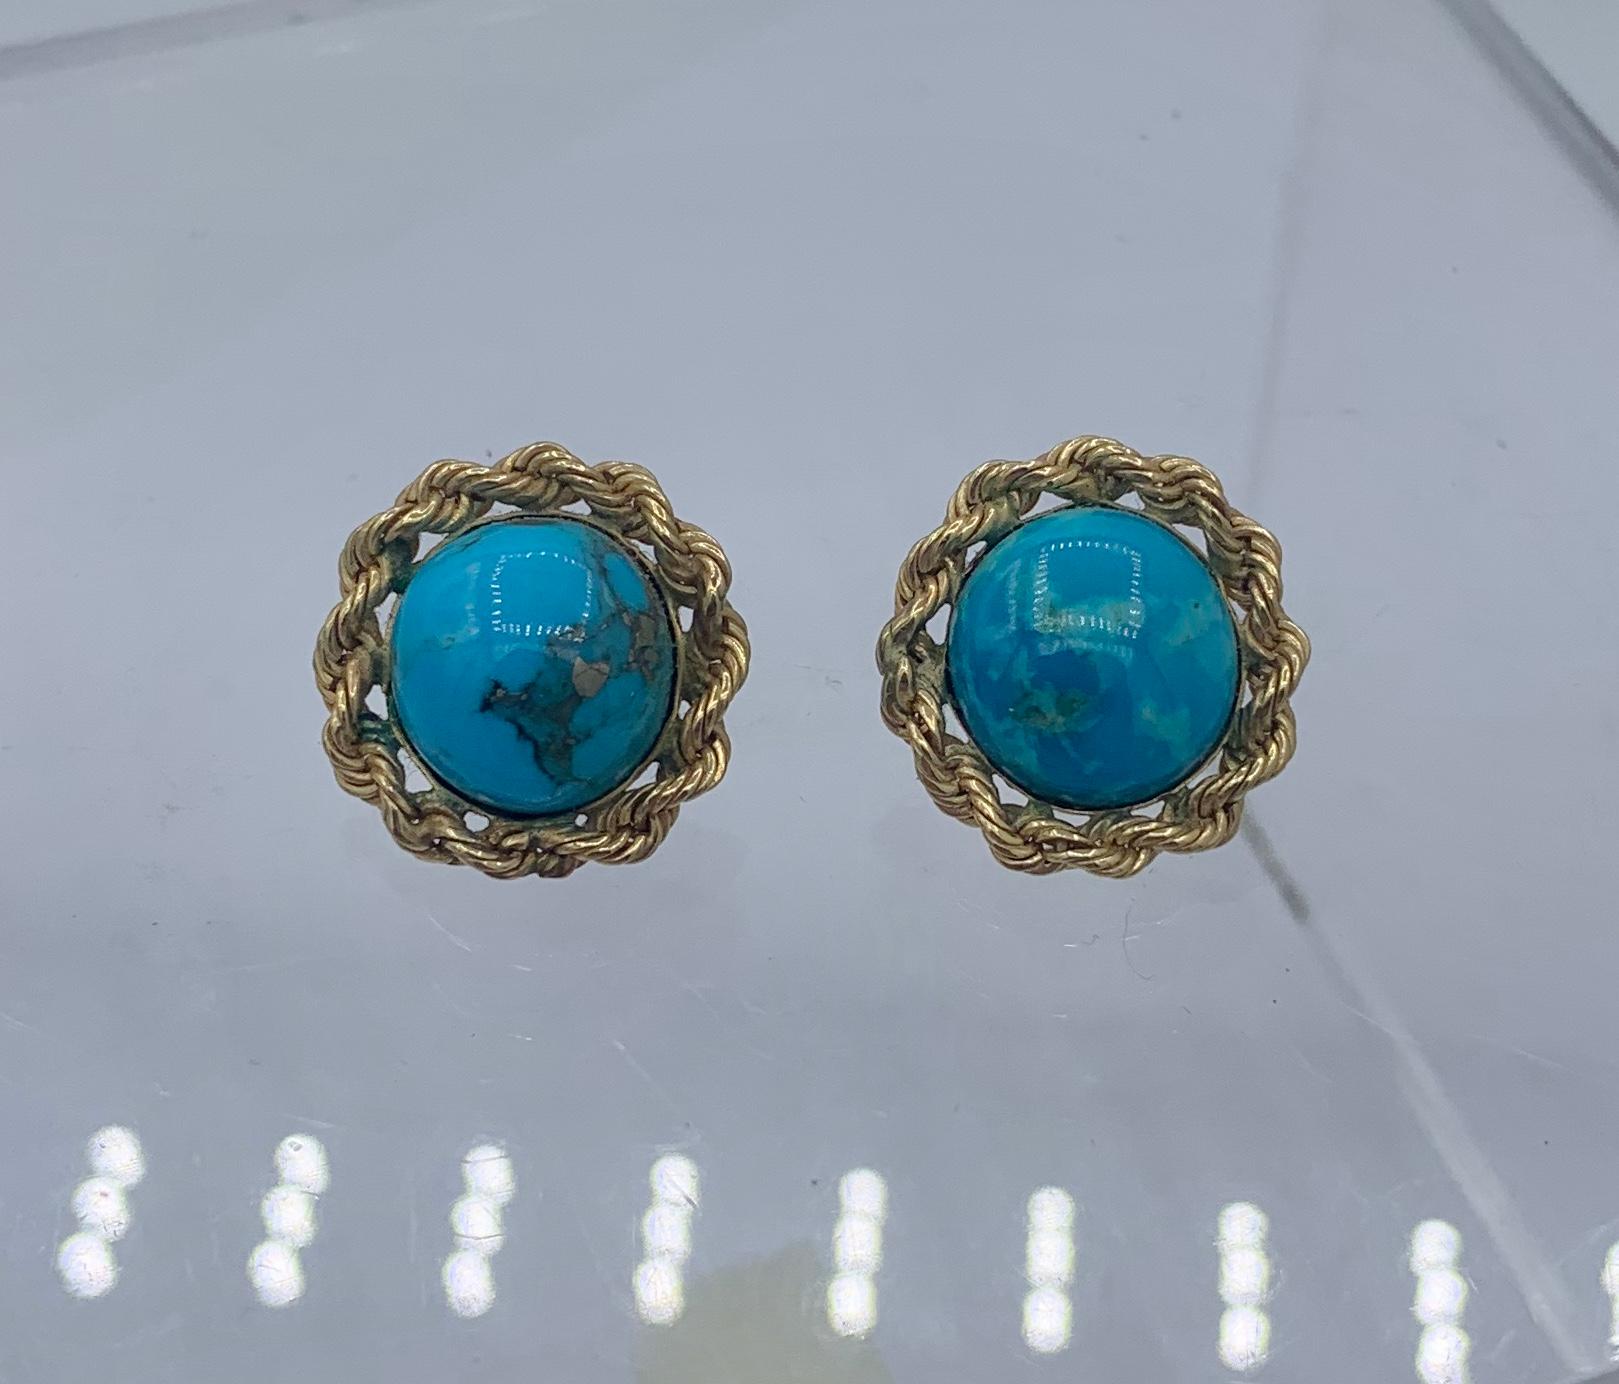 Cabochon Retro Turquoise Earrings 14 Karat Gold Braided Border Mid-Century For Sale